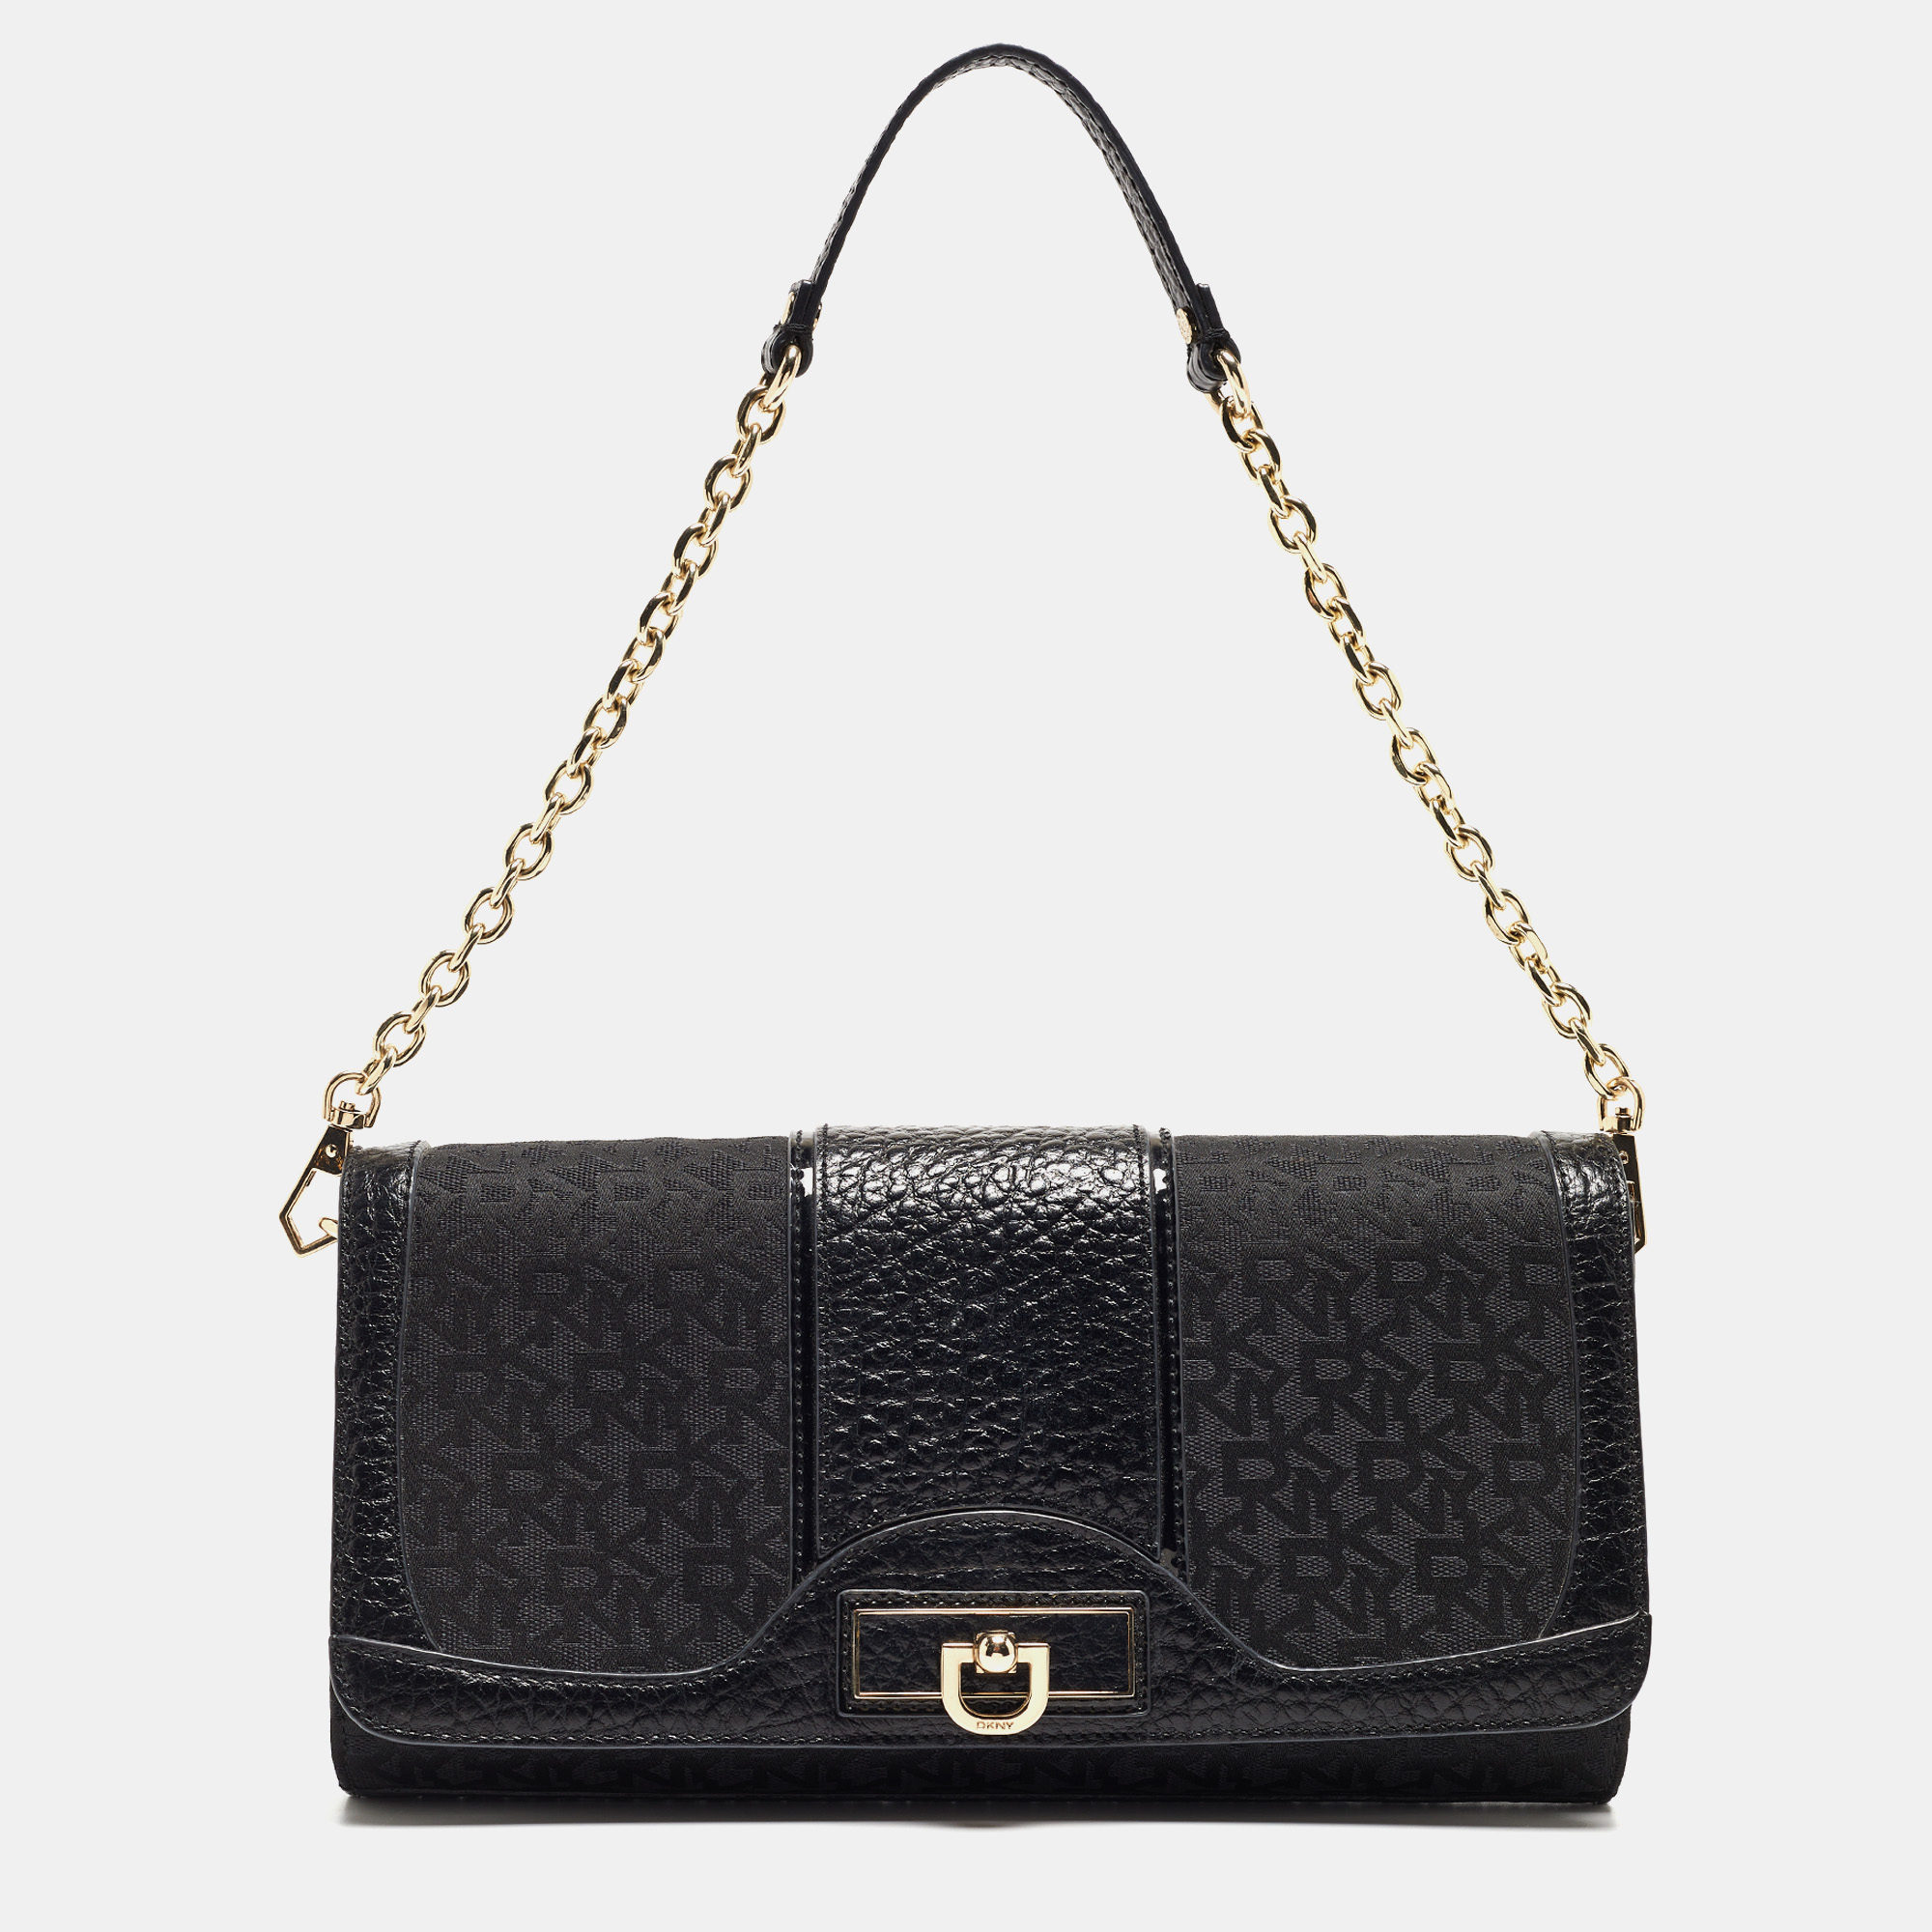 Dkny black monogram canvas and leather flap chain bag